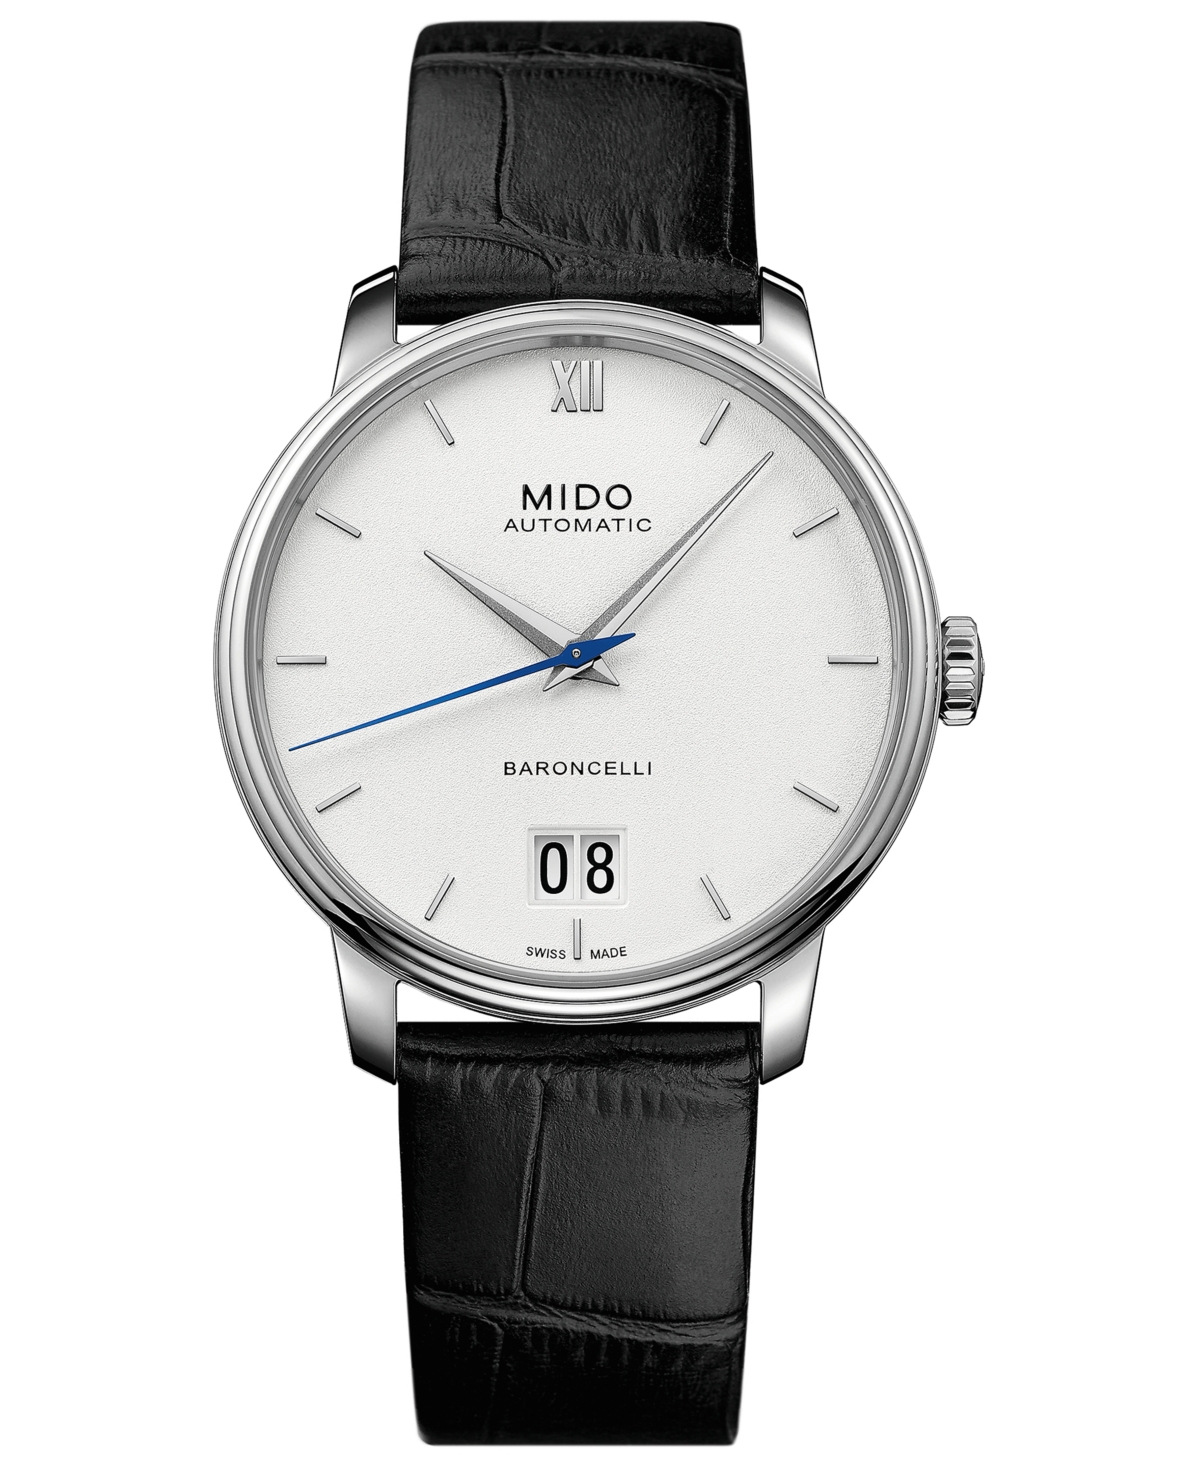 Mido Men's Swiss Automatic Baroncelli Iii Black Leather Strap Watch 40mm